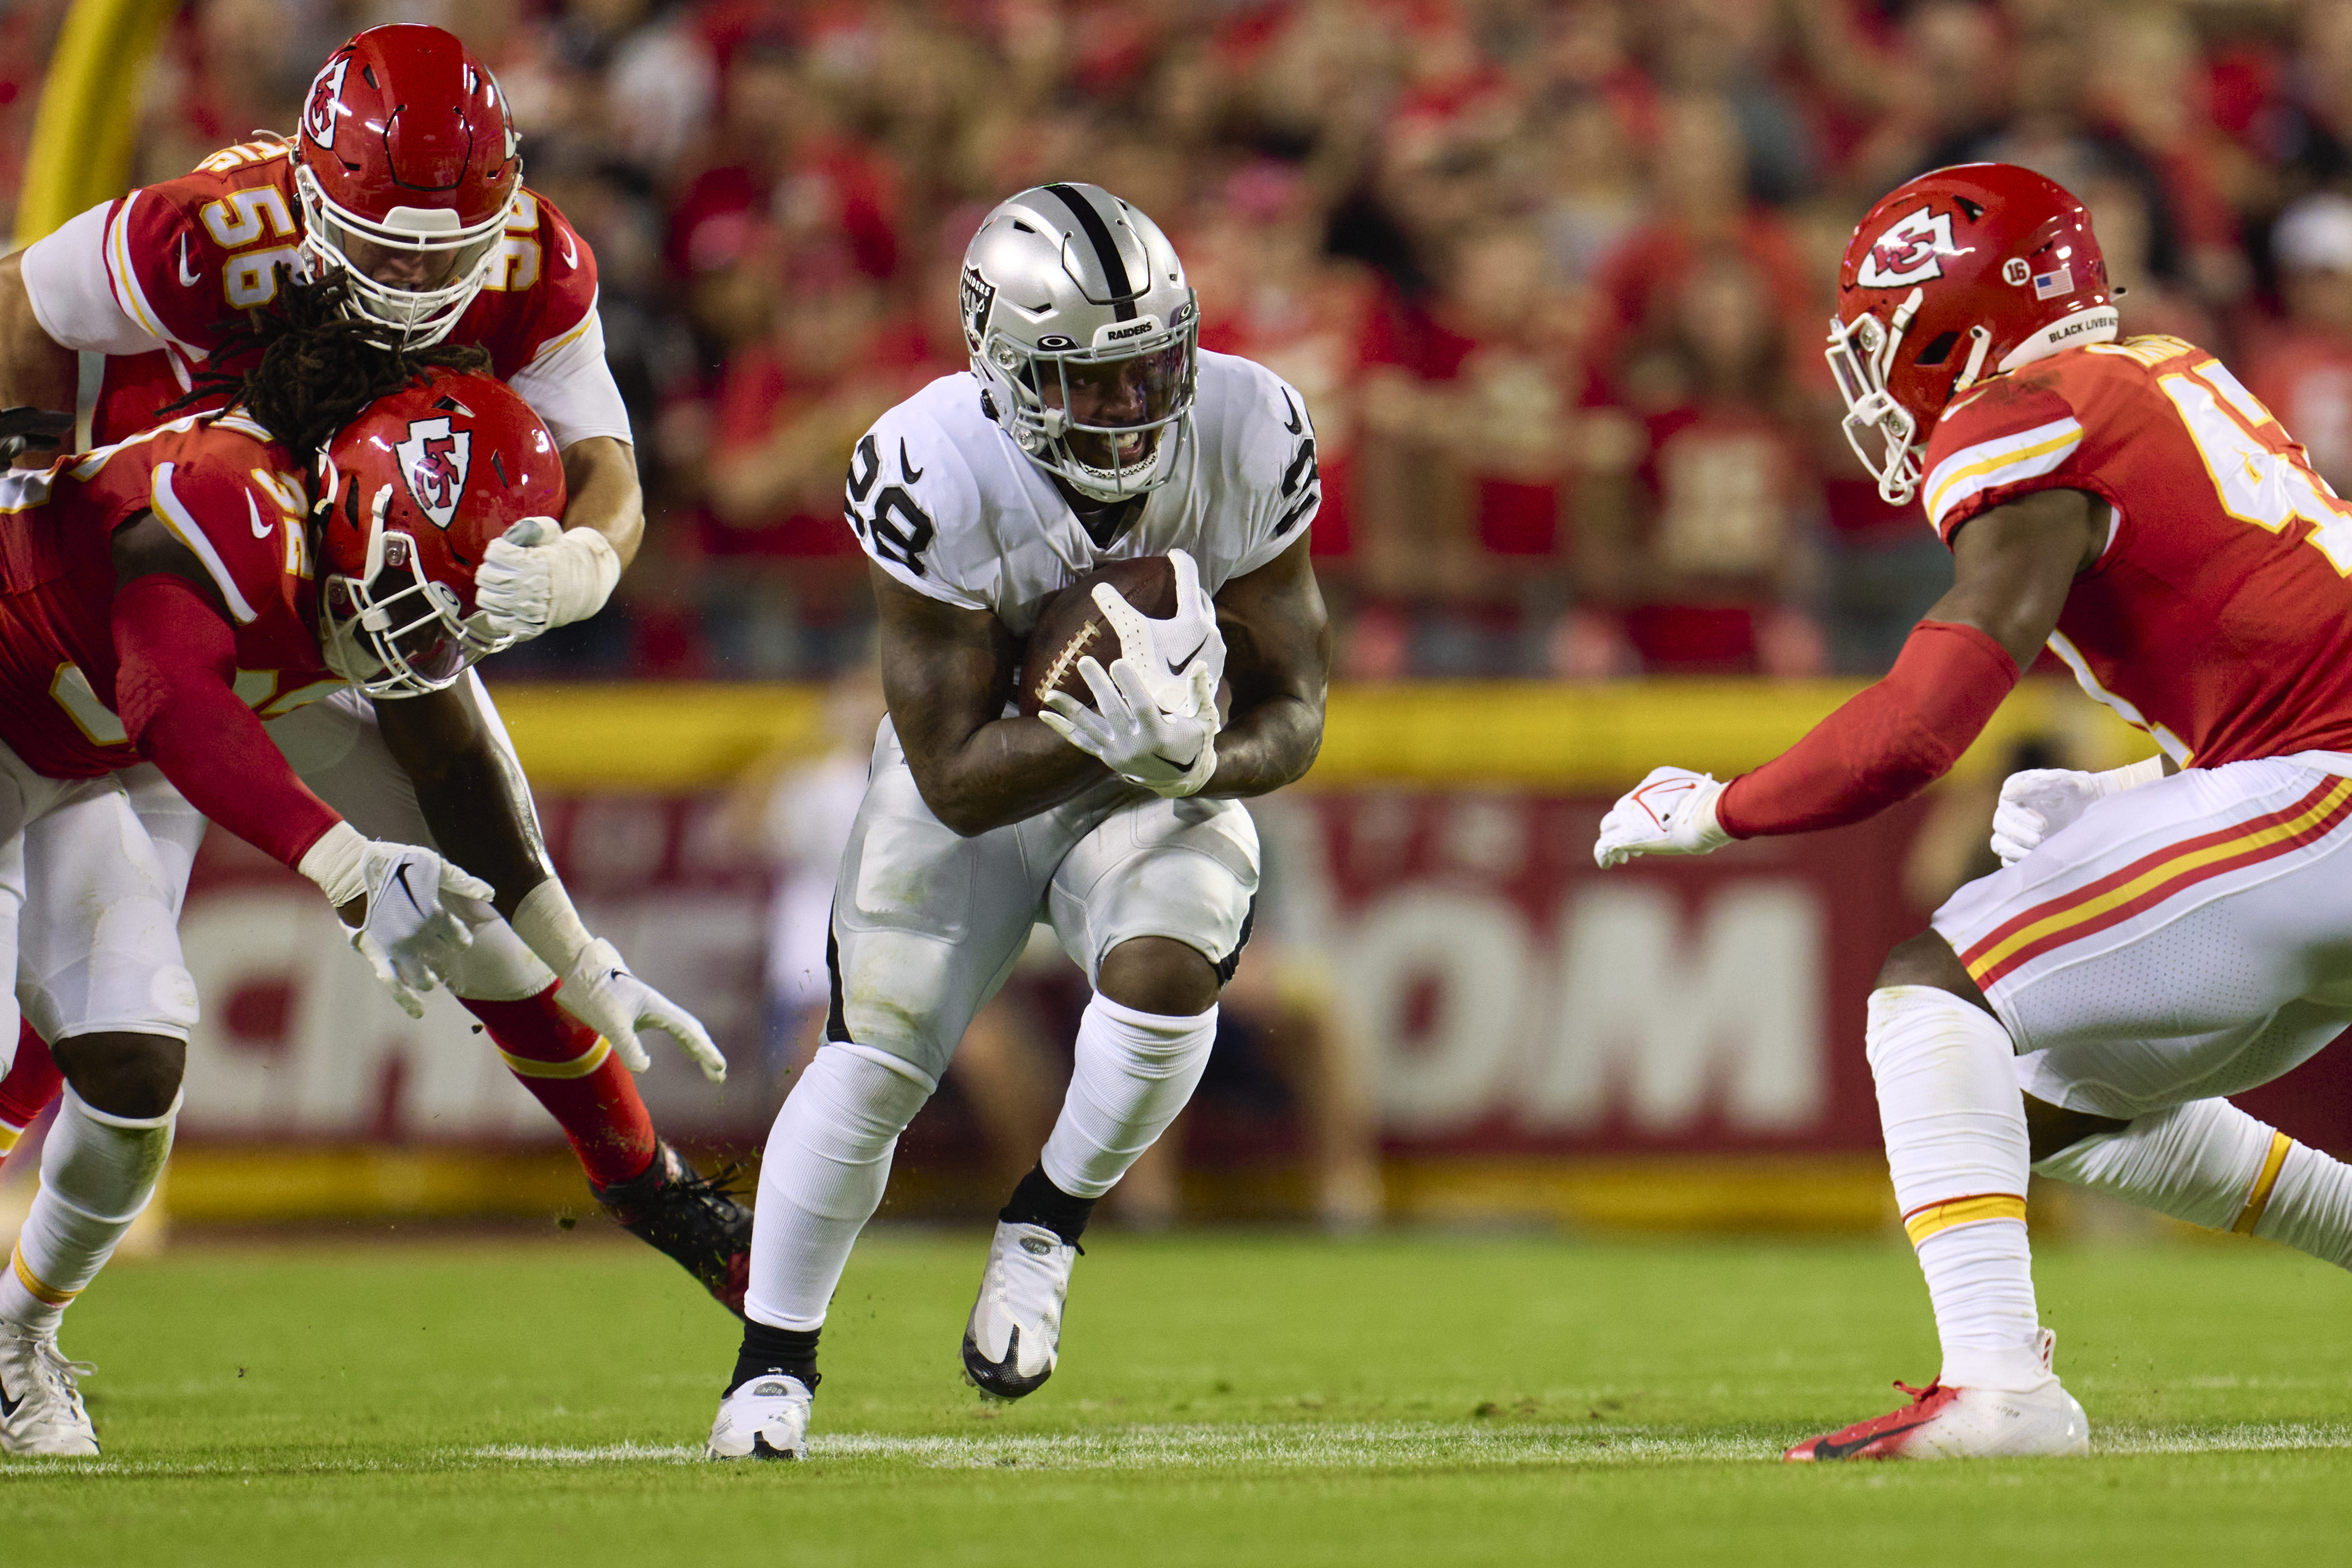 Running back Josh Jacobs (C) of the Las Vegas Raiders runs with the ball in the game against the Kansas City Chiefs at Arrowhead Stadium in Kansas City, Missouri, October 10, 2022. /CFP